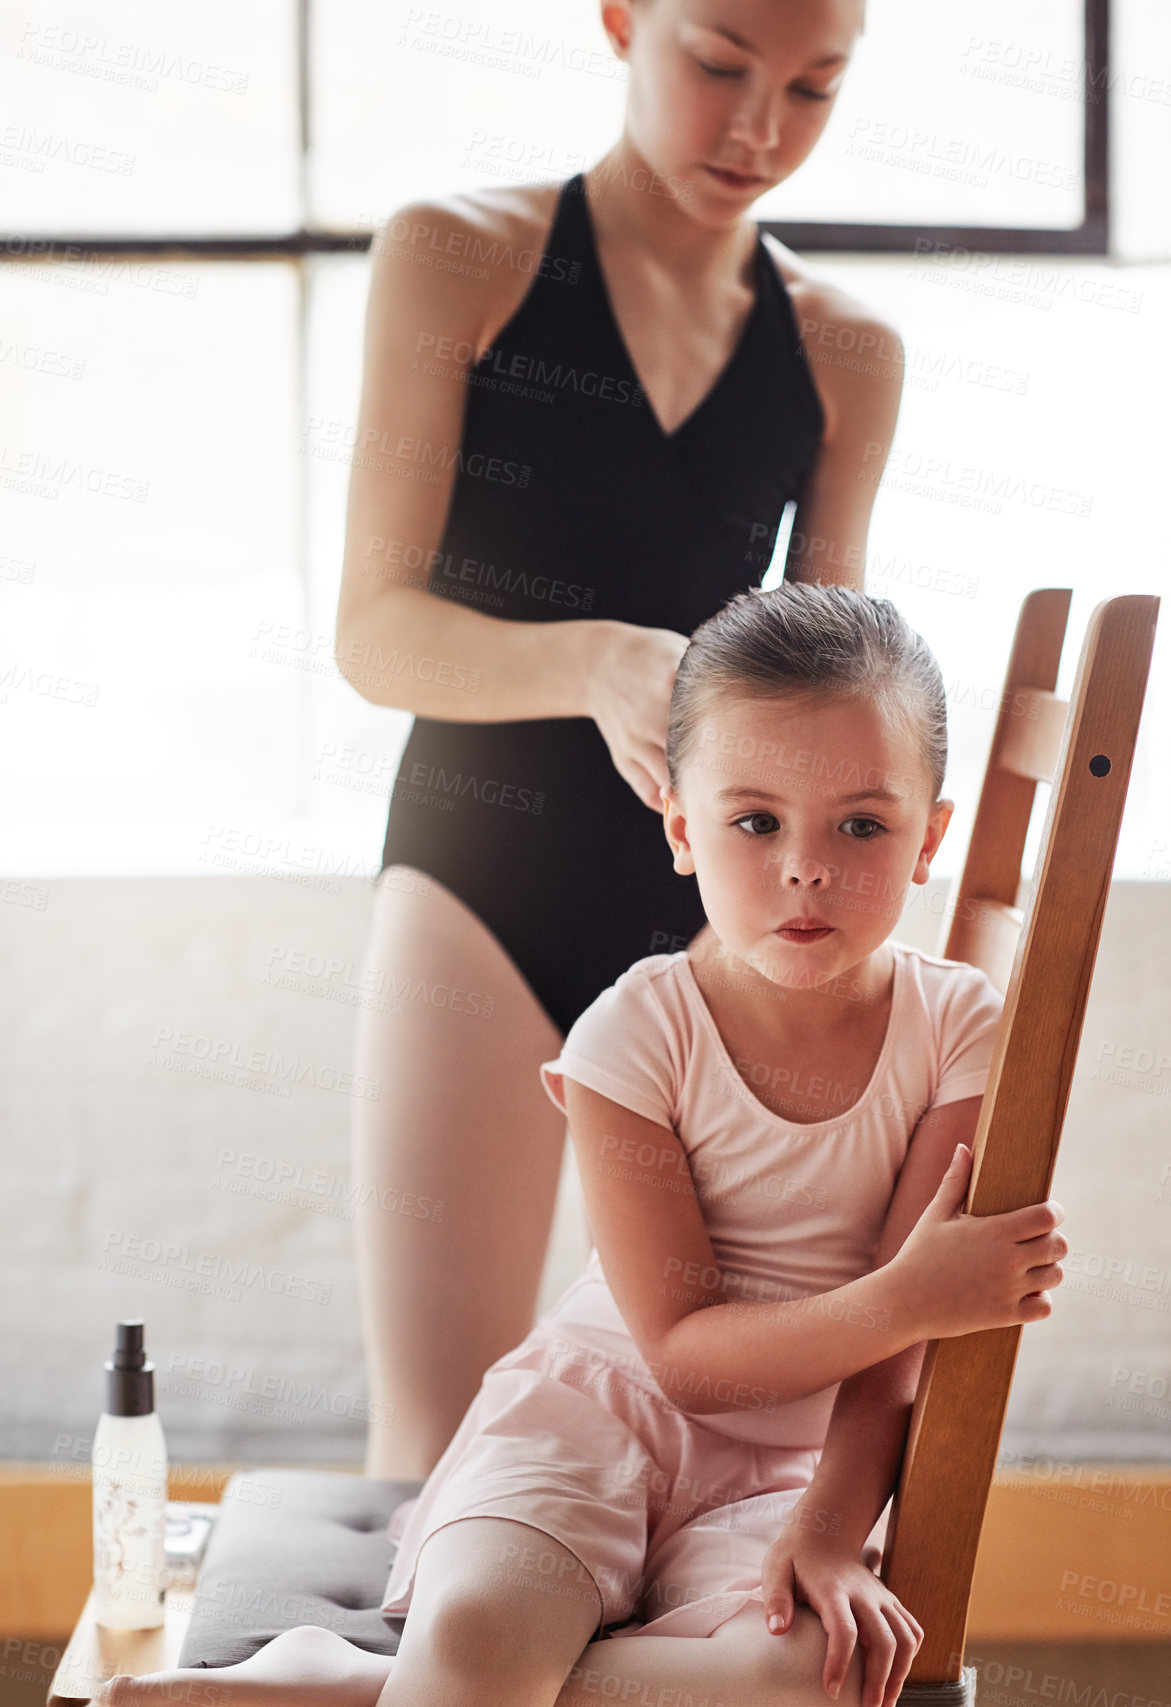 Buy stock photo Shot of an adorable little girl getting her hair tied up by an older girl in a ballet studio